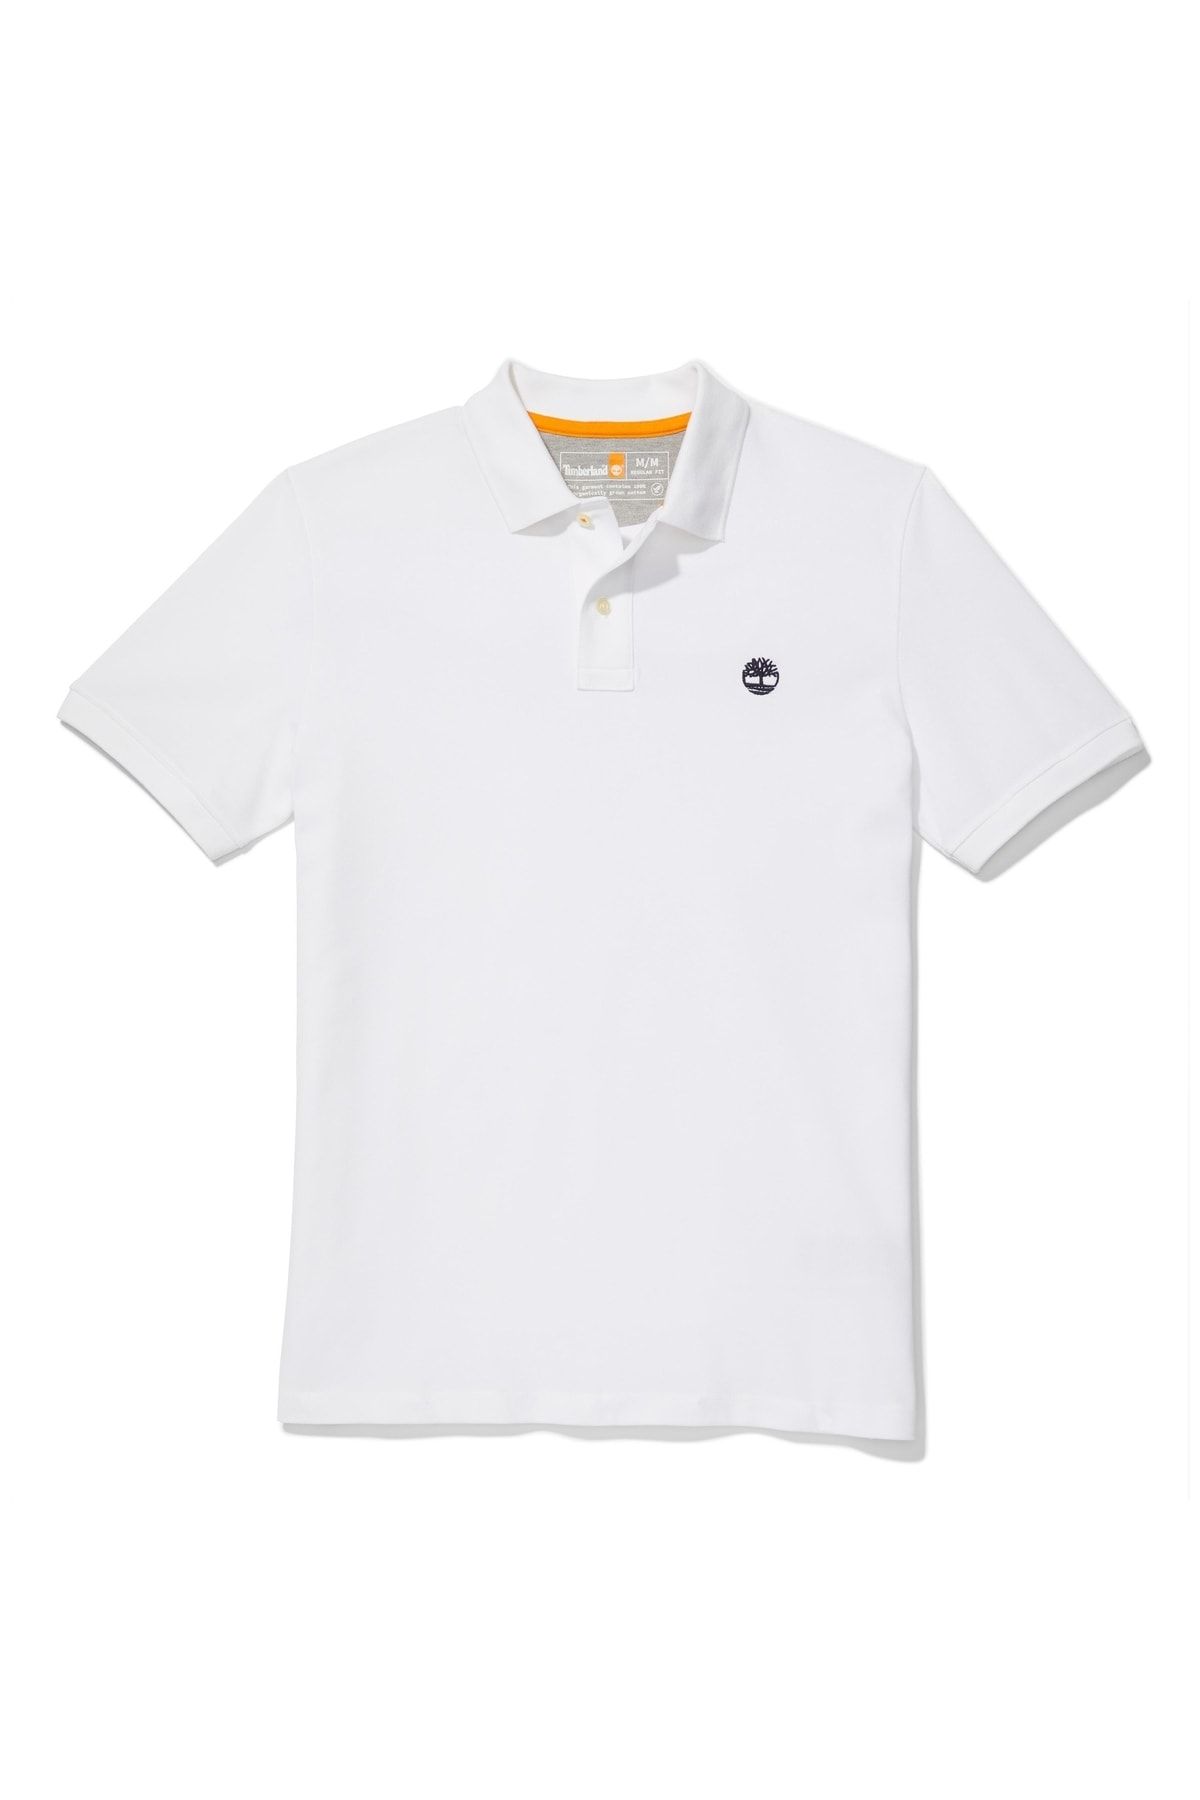 Timberland Pique Short Sleeve Polo Tb0a26n41001